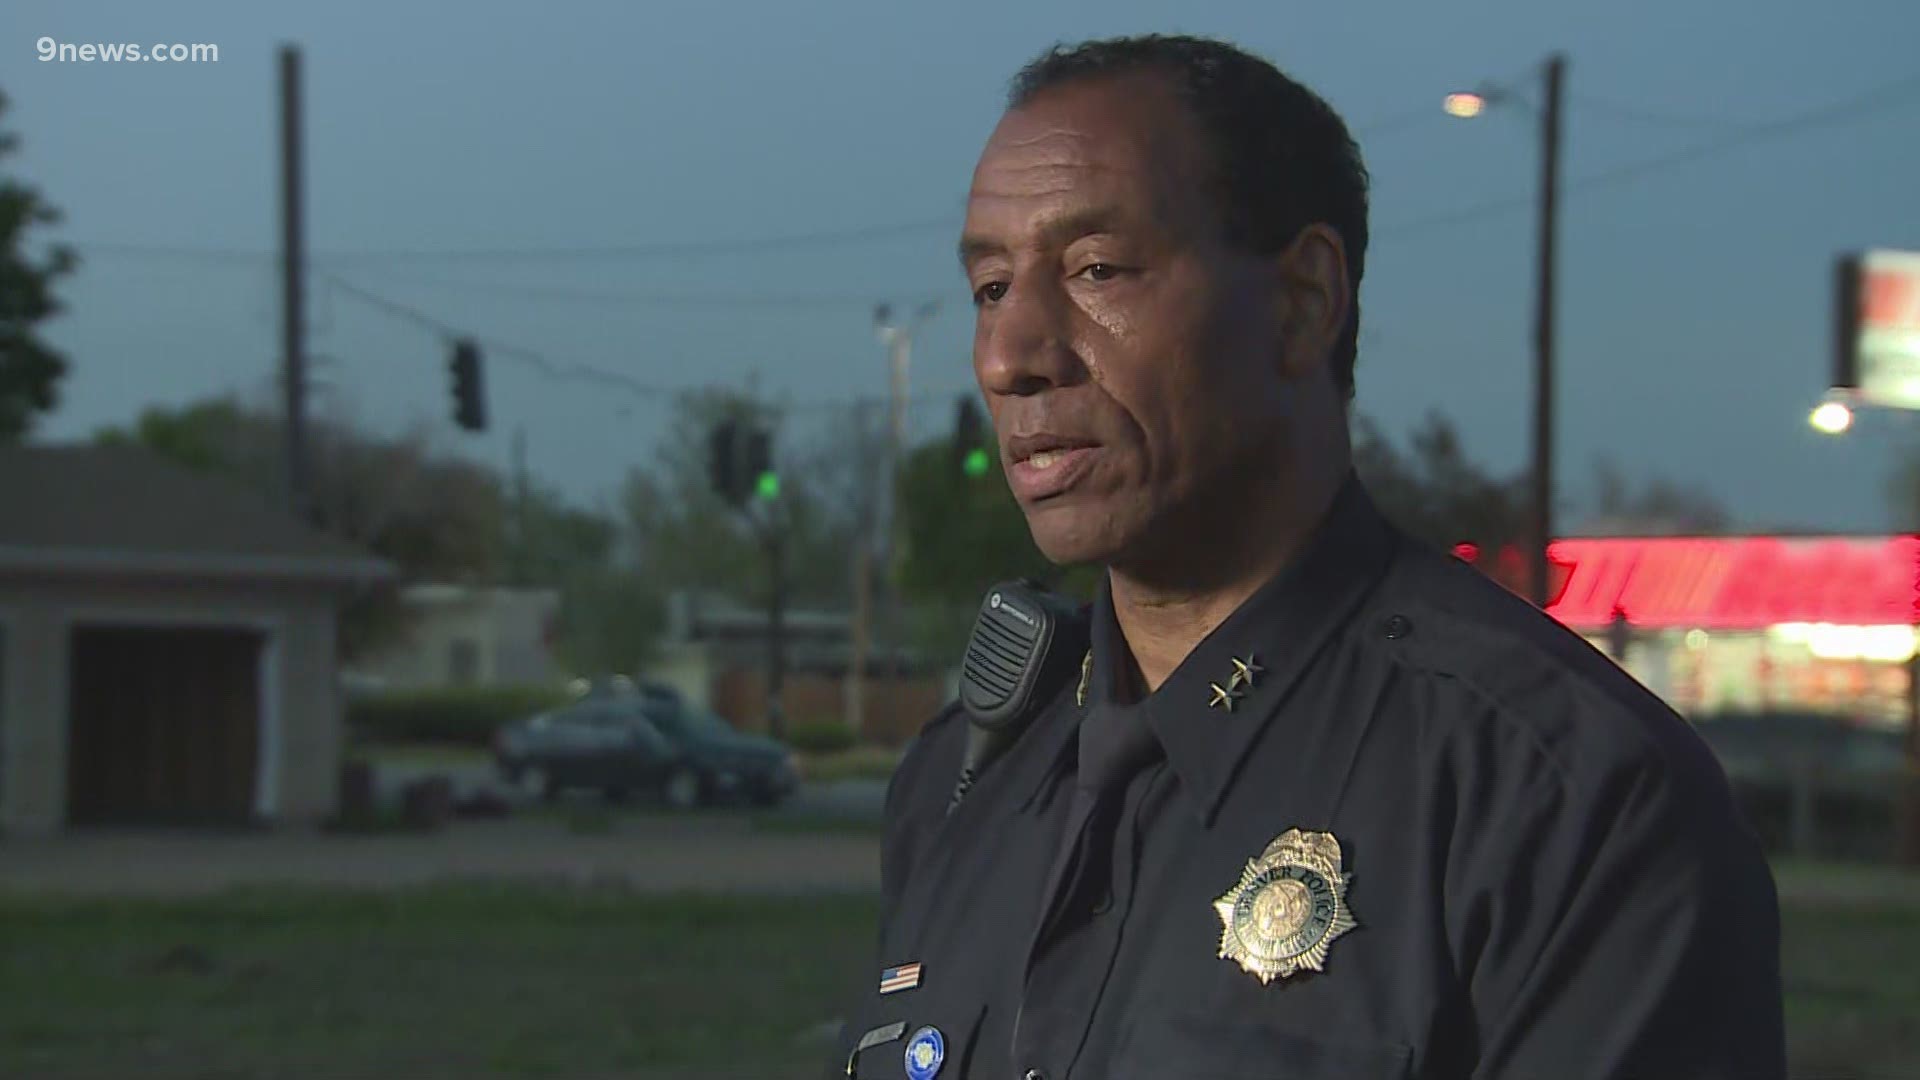 Division Chief Ron Thomas provides an update on a shooting involving a DPD officer that occurred near South Federal Boulevard and West Harvard Avenue.